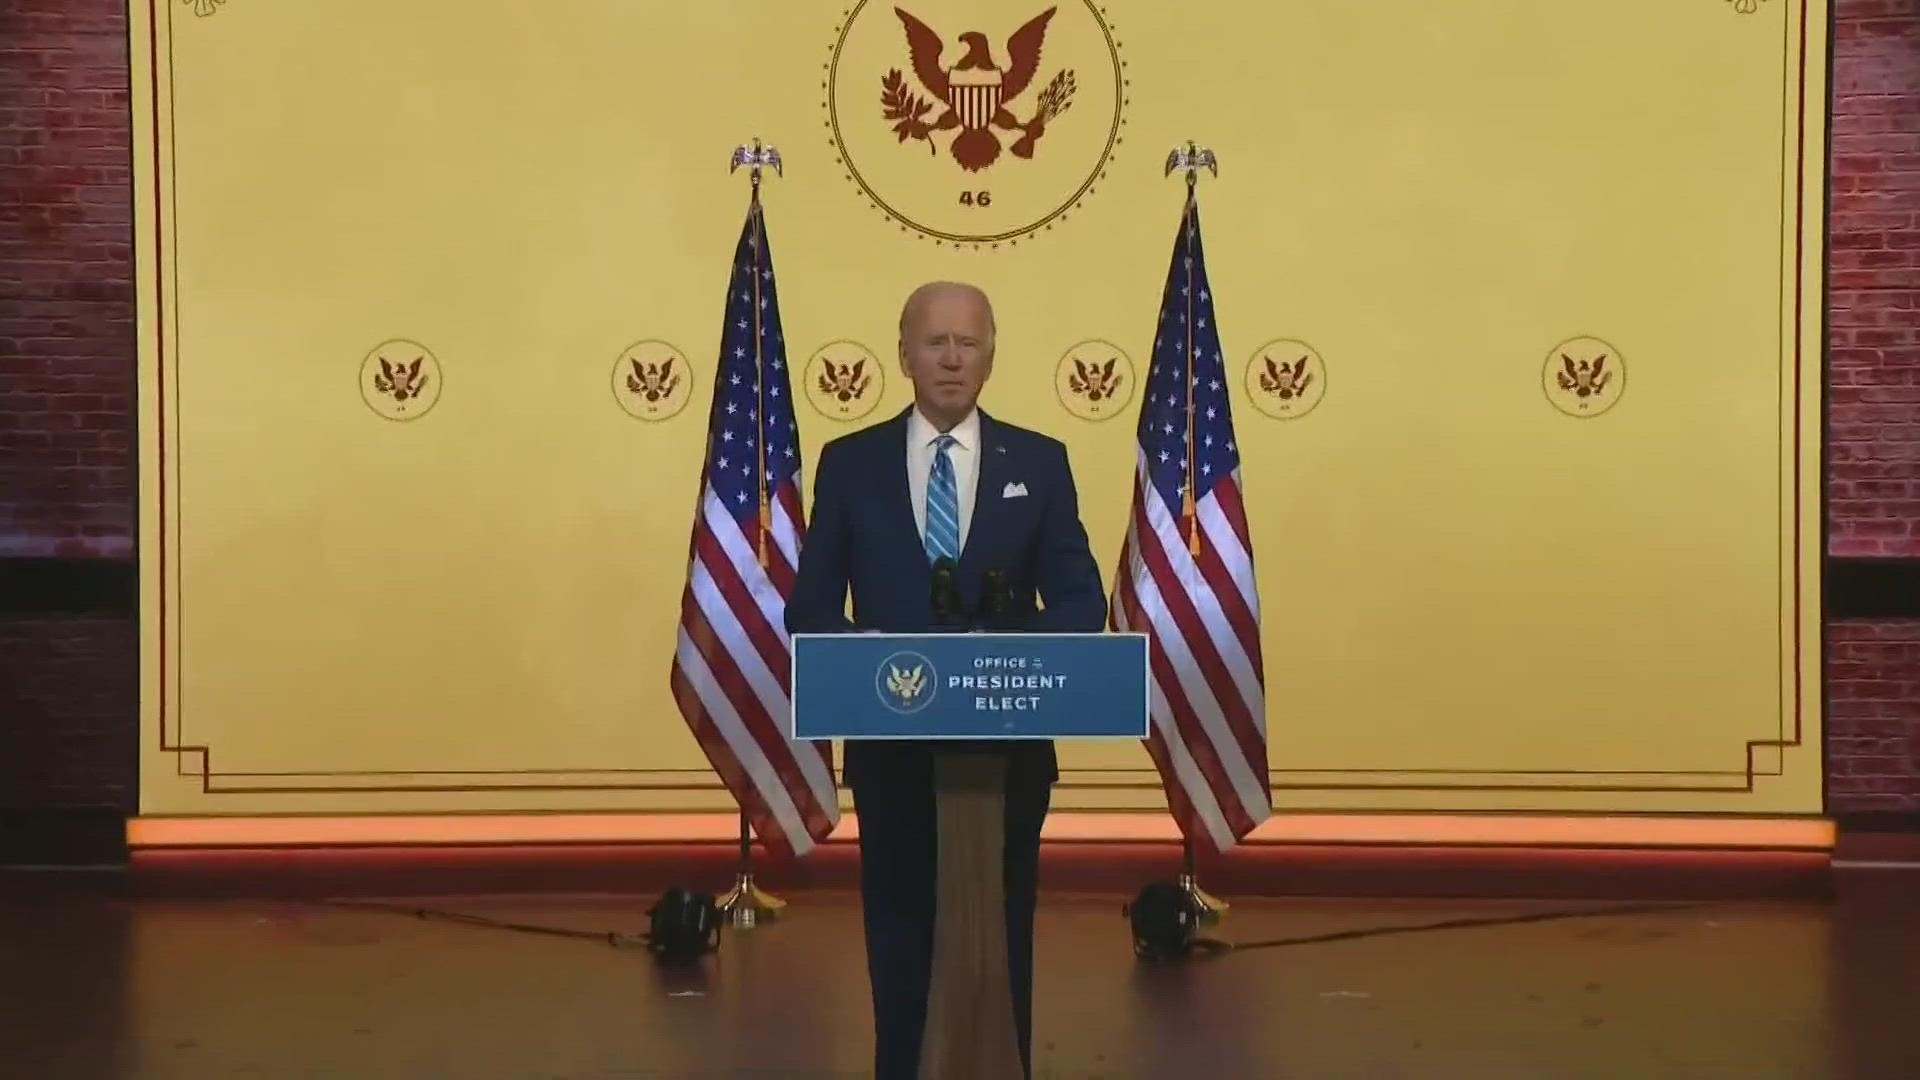 President-elect Joe Biden delivers a Thanksgiving address to the nation seeking to unify Americans in the face of the coronavirus pandemic